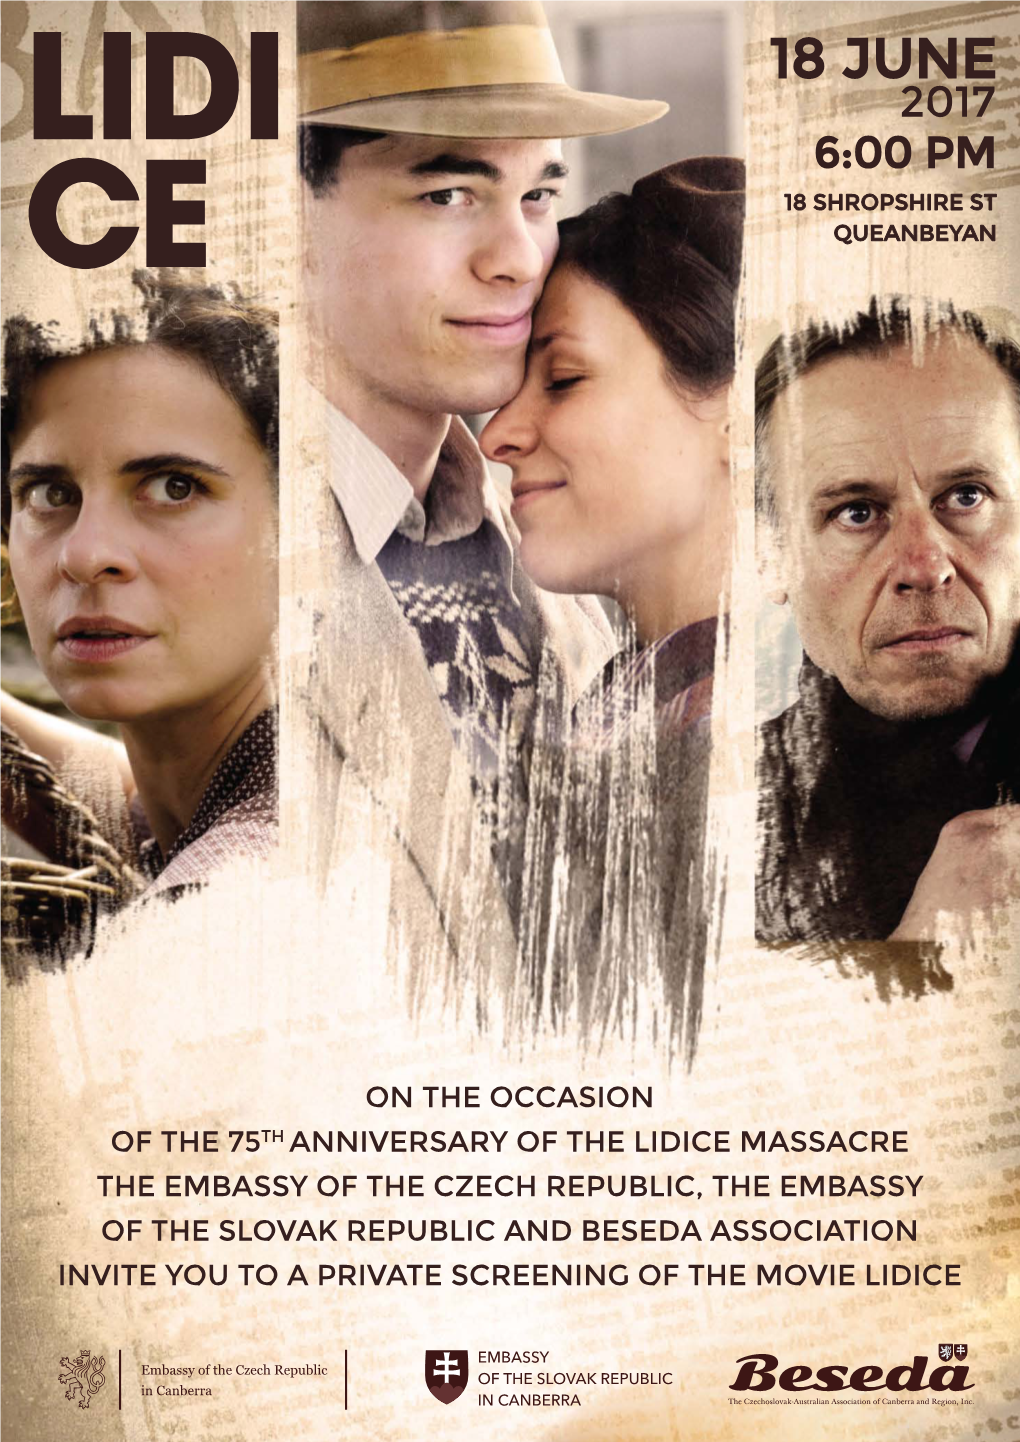 Lidice Massacre the Embassy of the Czech Republic, the Embassy of the Slovak Republic and Beseda Association Invite You to a Private Screening of the Movie Lidice